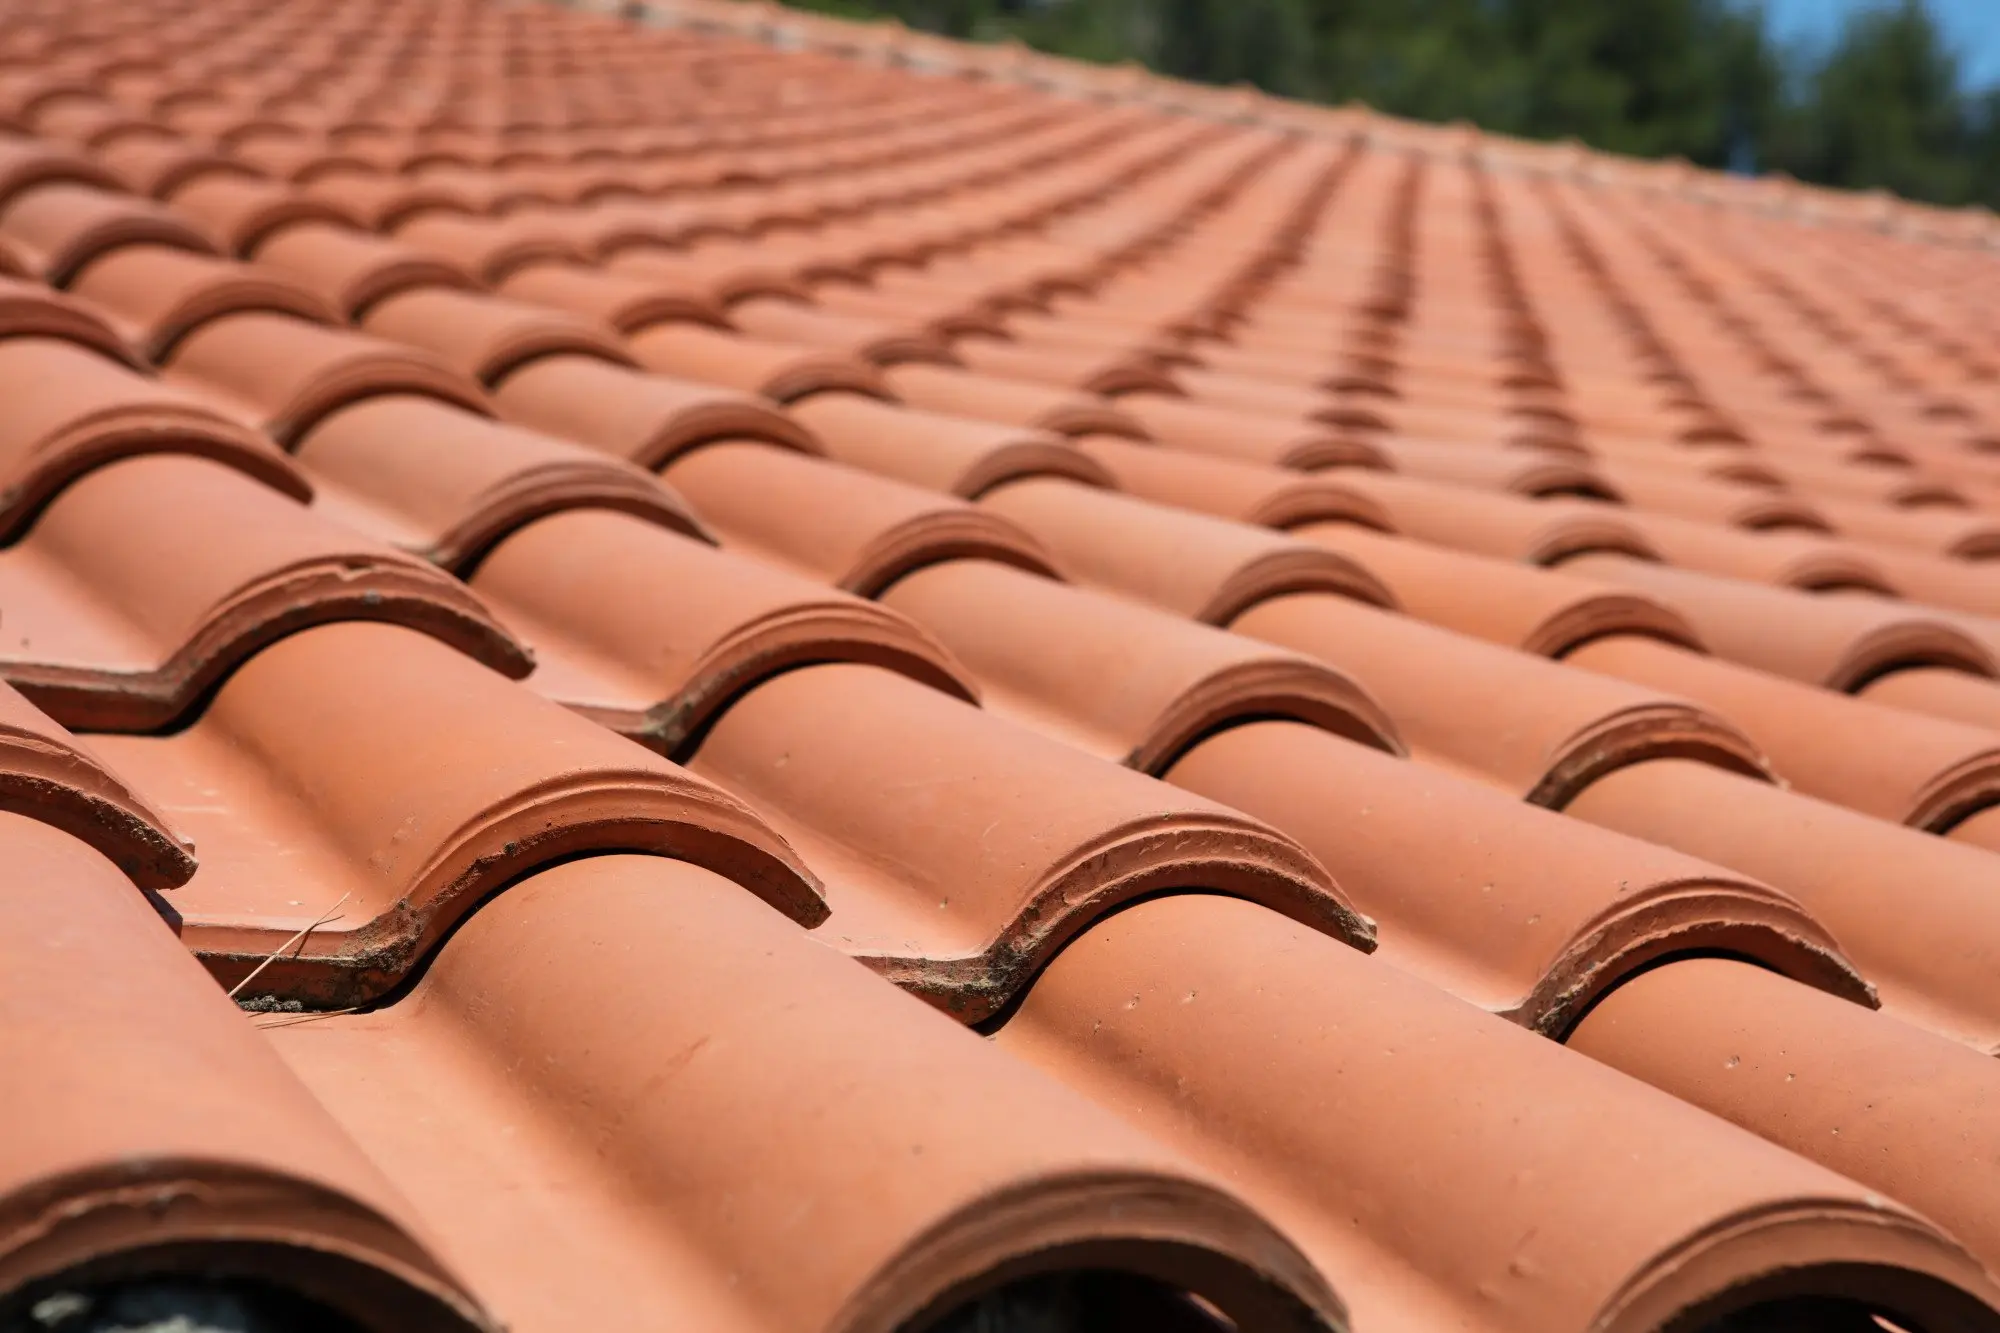 types of roof tiles